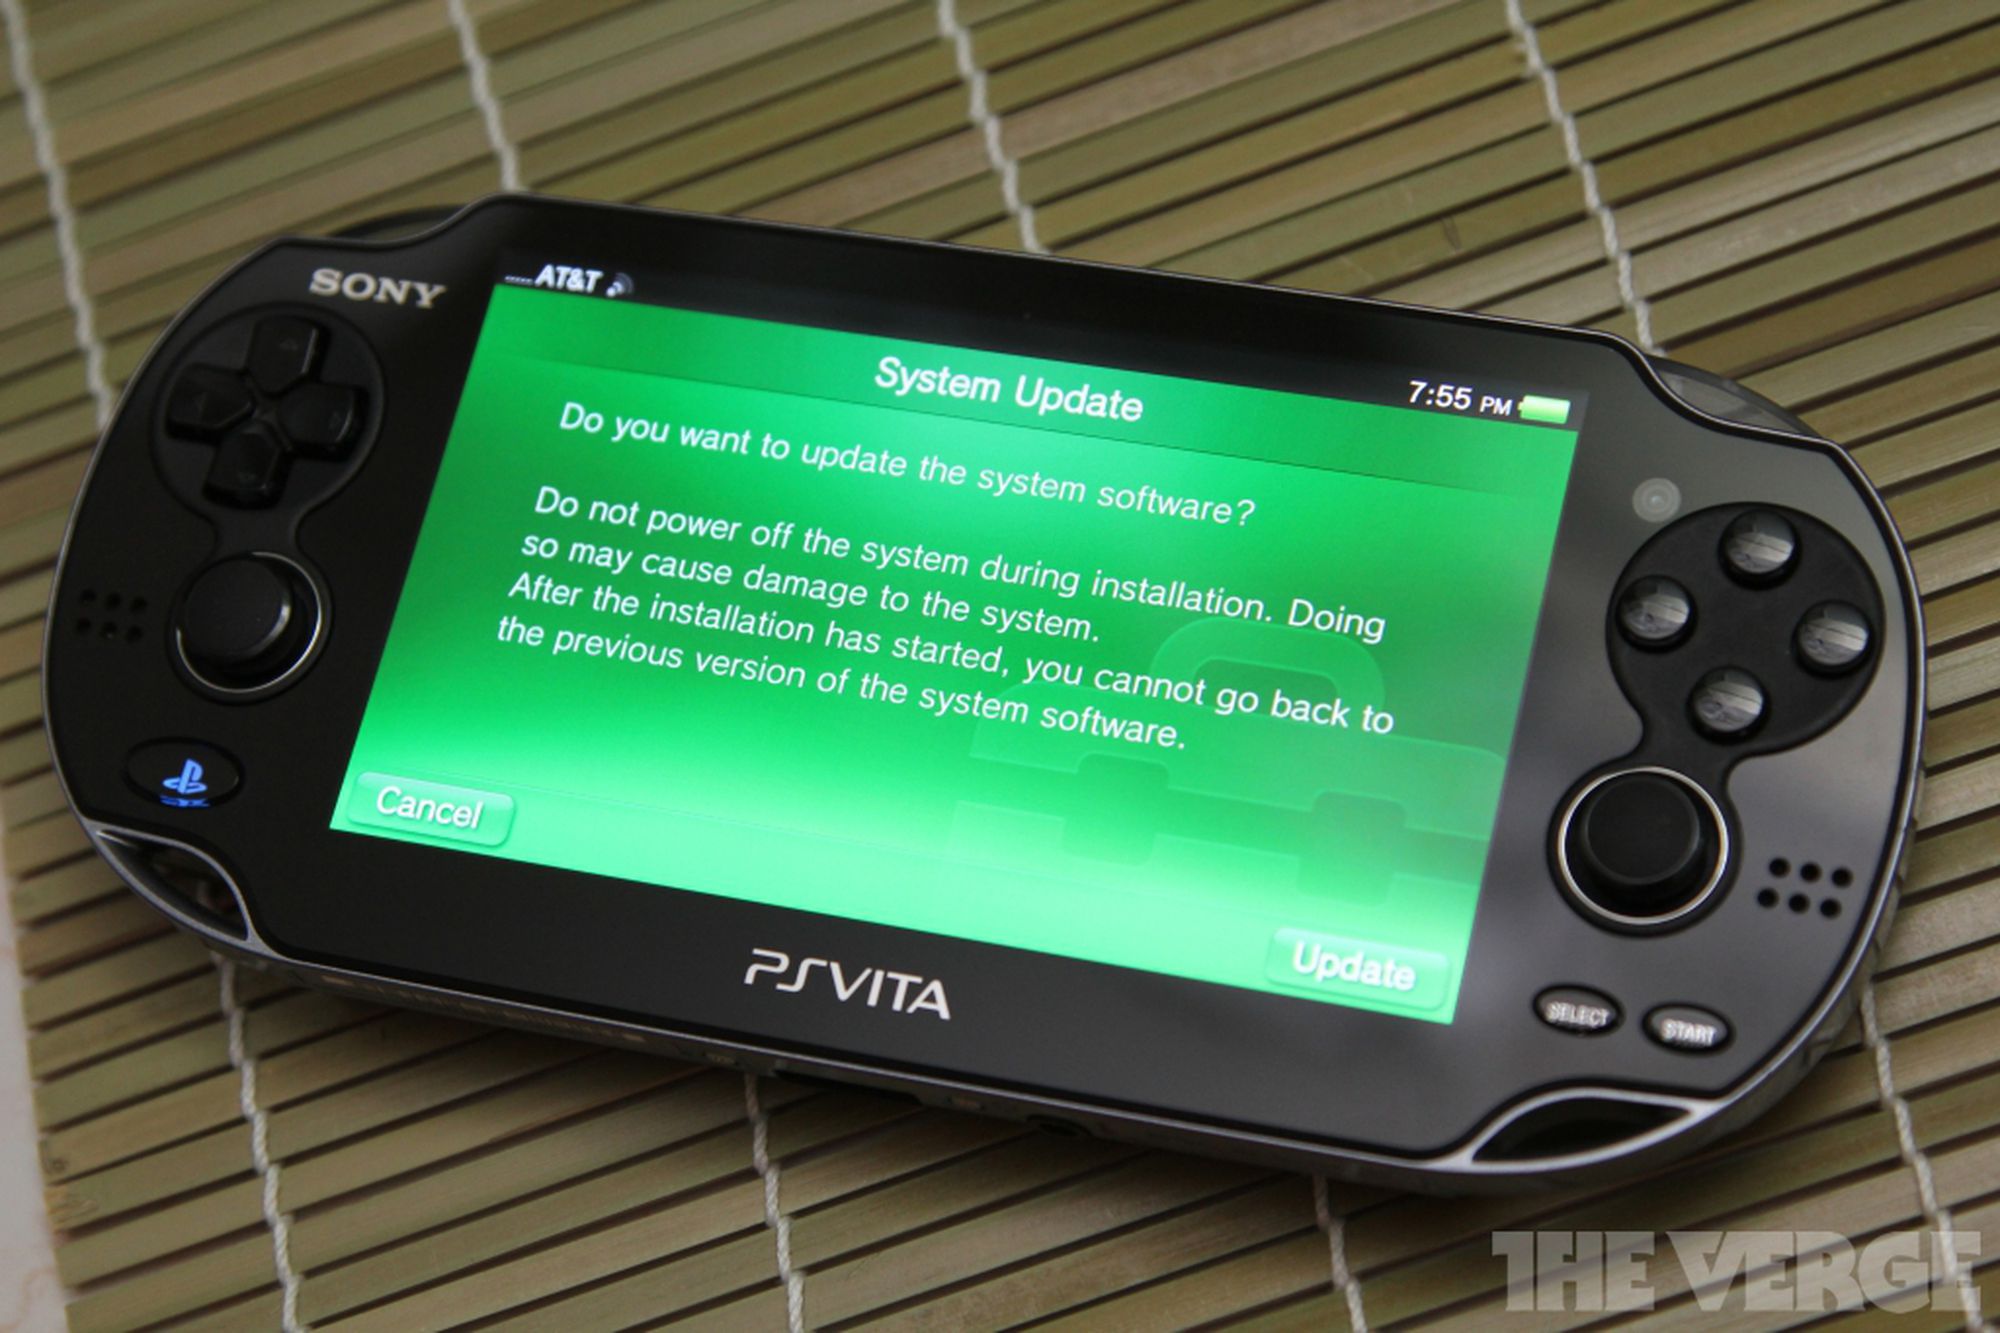 PS Vita firmware update  available now, as well as the handheld's first  free-to-play downloadable - The Verge